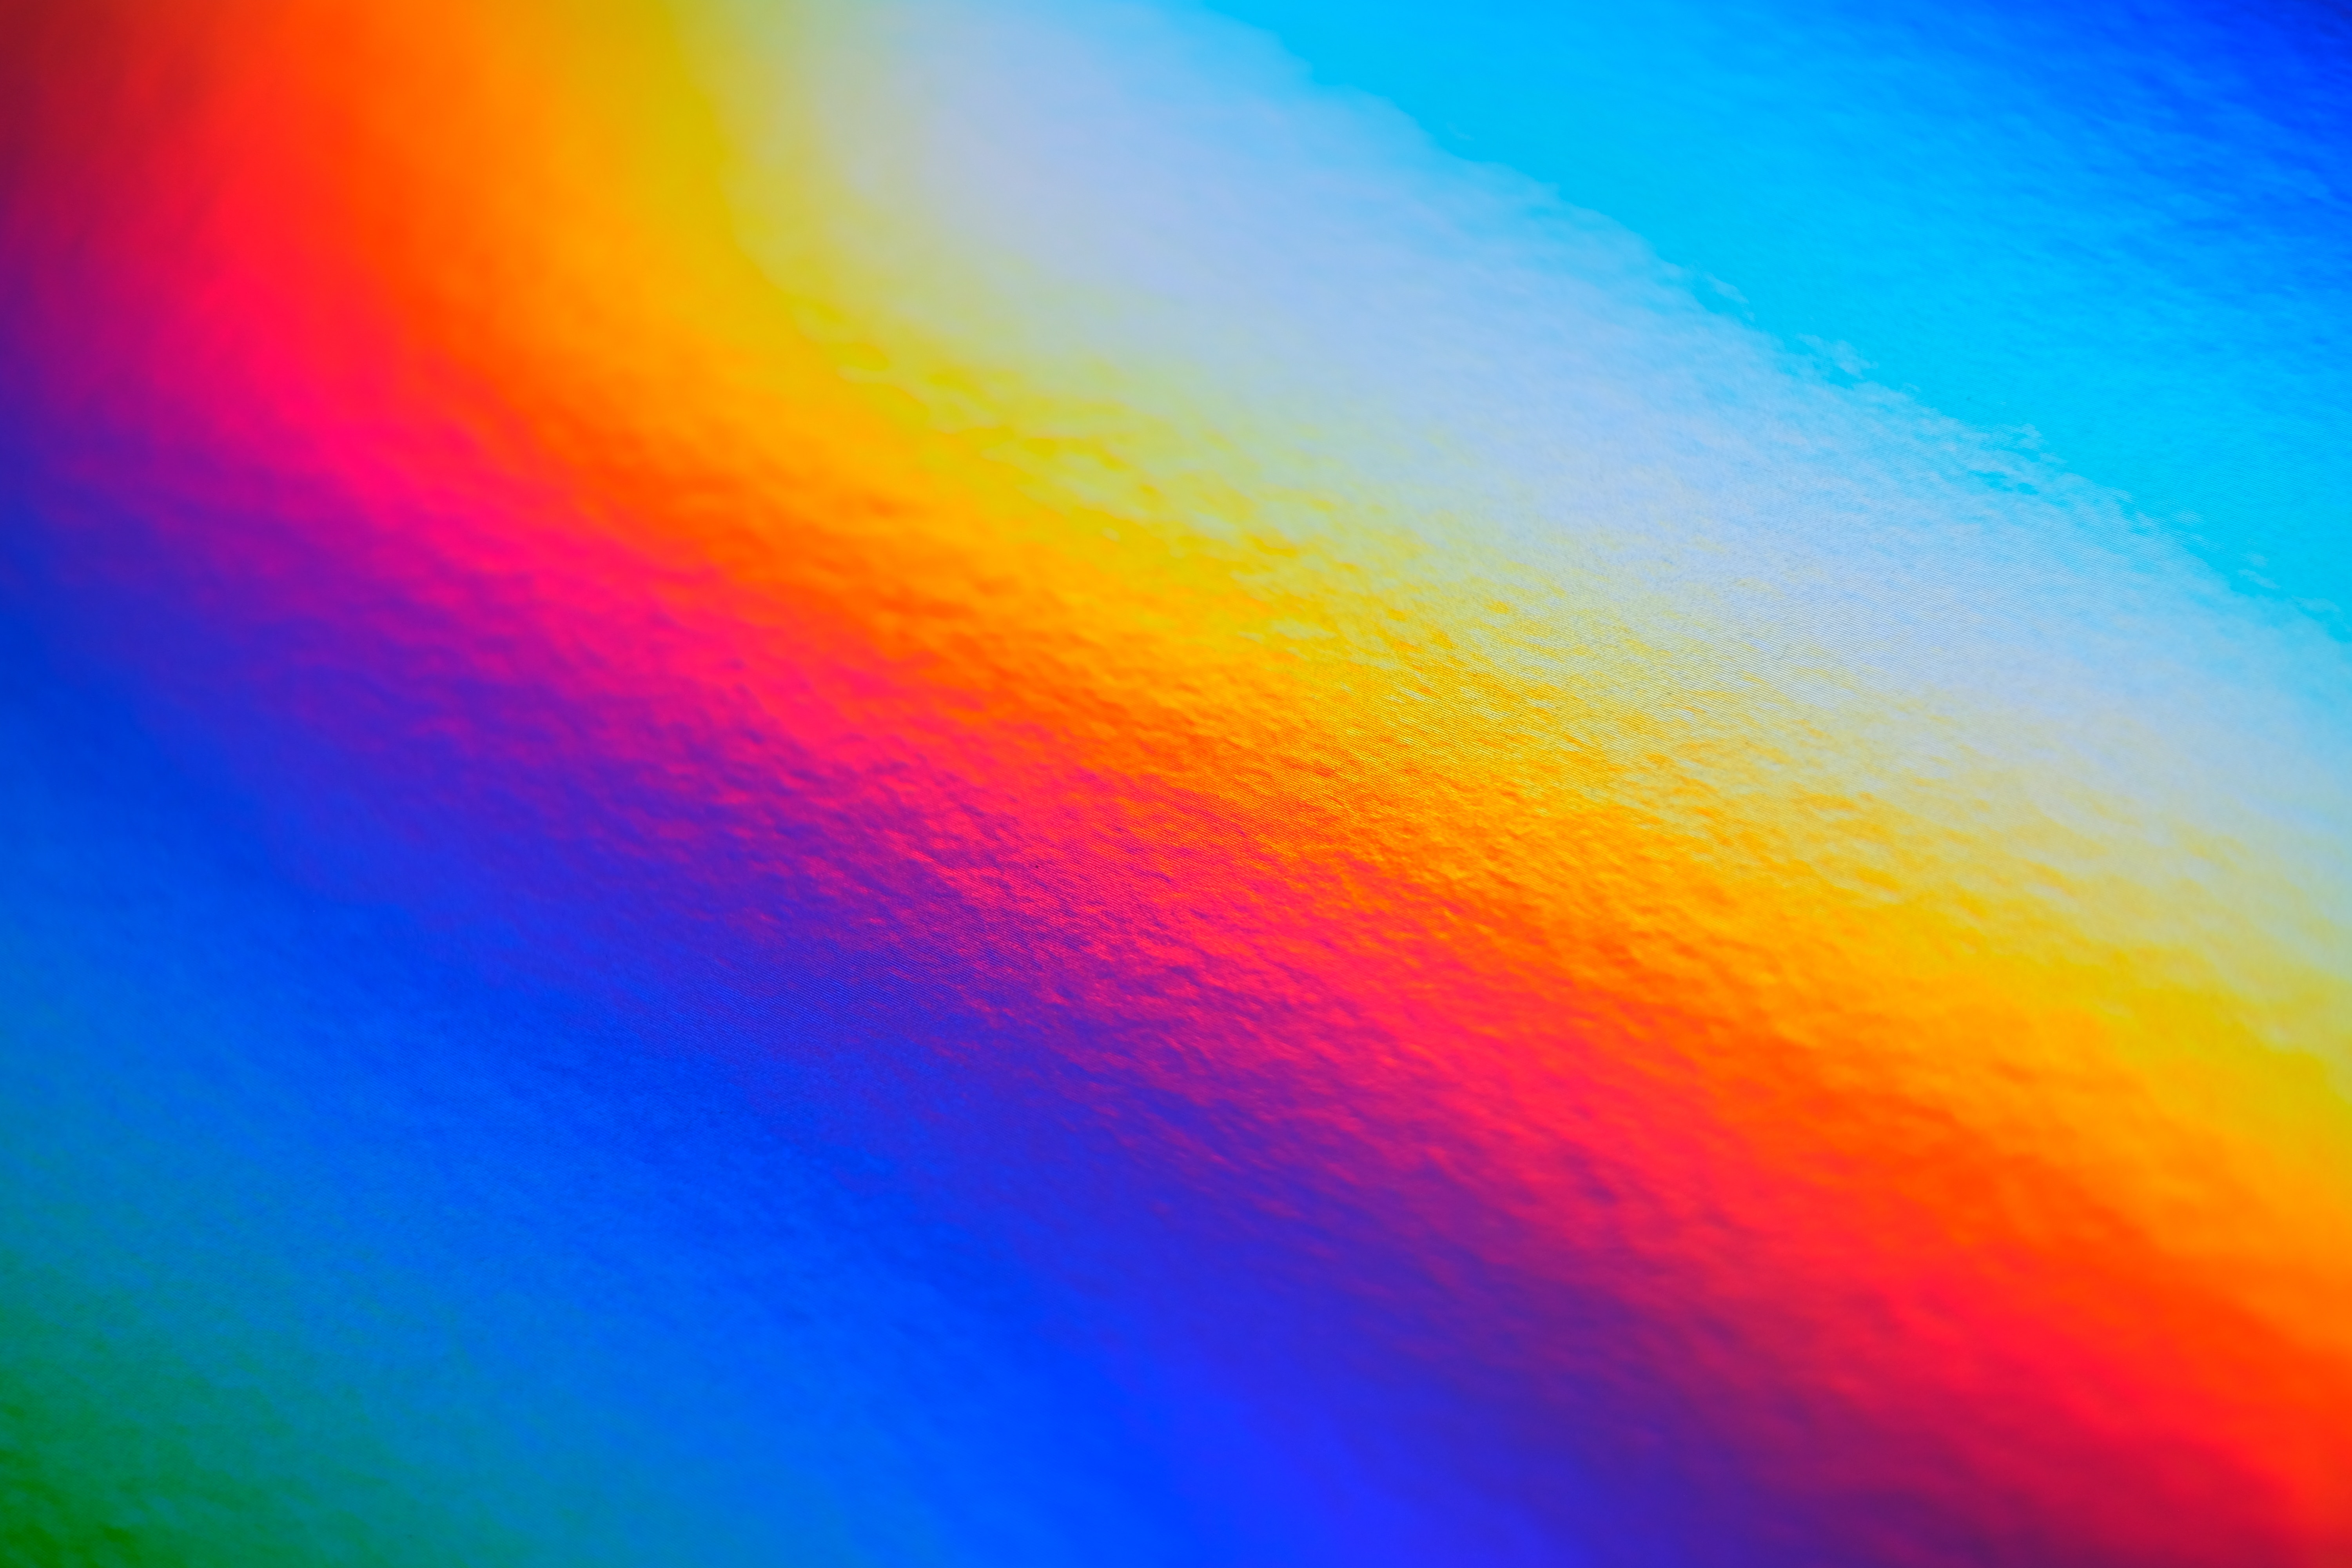 151644 download wallpaper gradient, abstract, rainbow, bright, lines, iridescent, obliquely screensavers and pictures for free